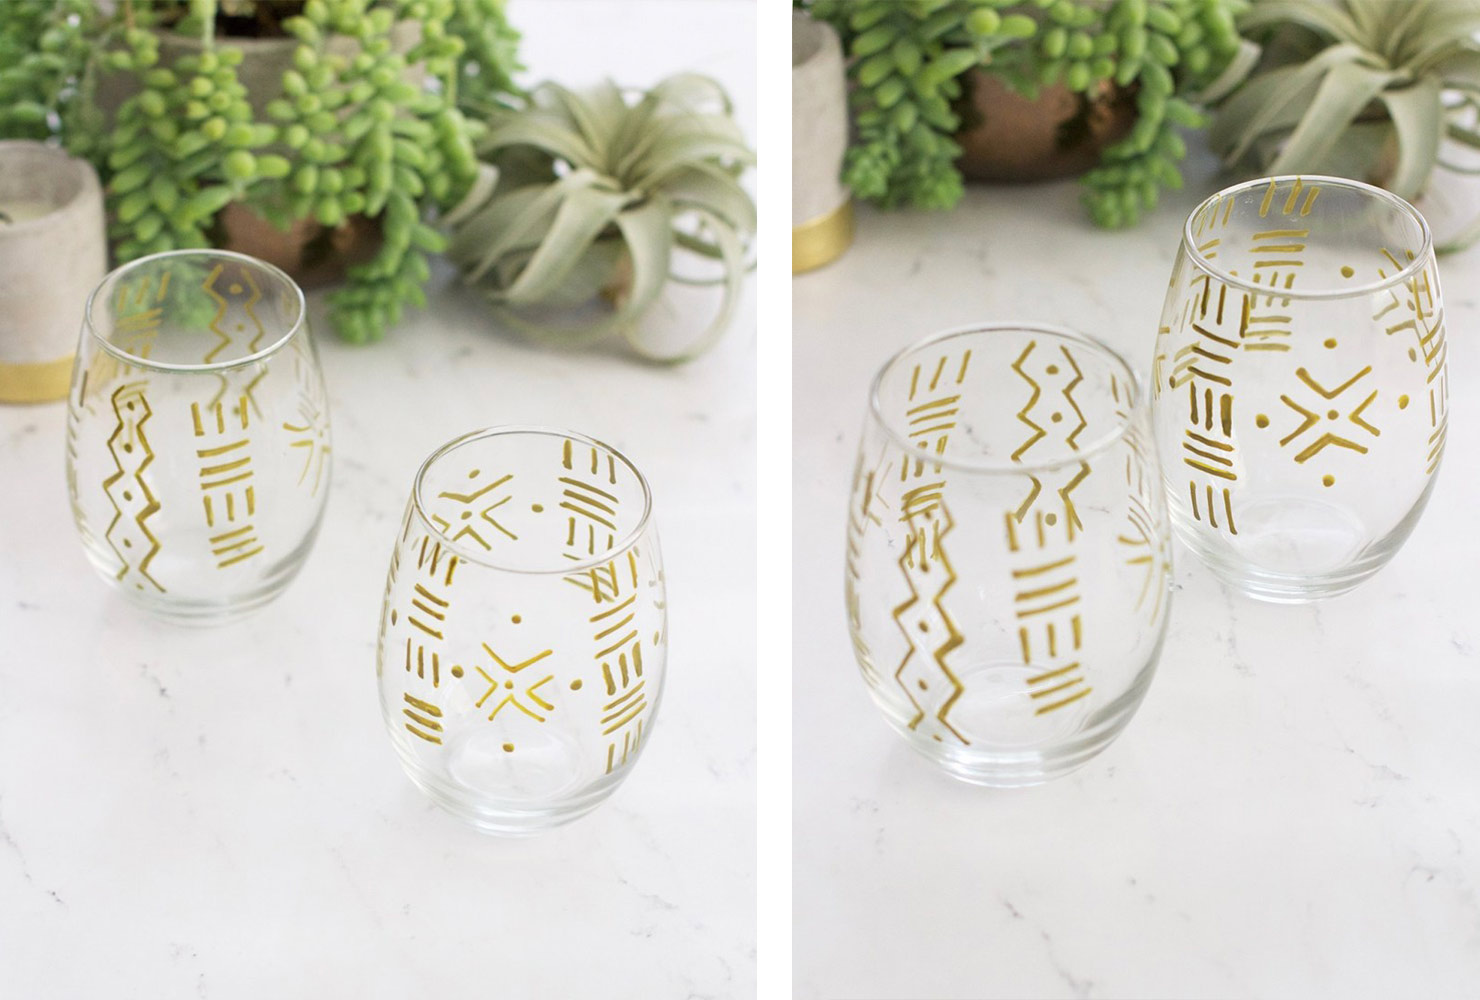 20 gift ideas painted wine glasses.